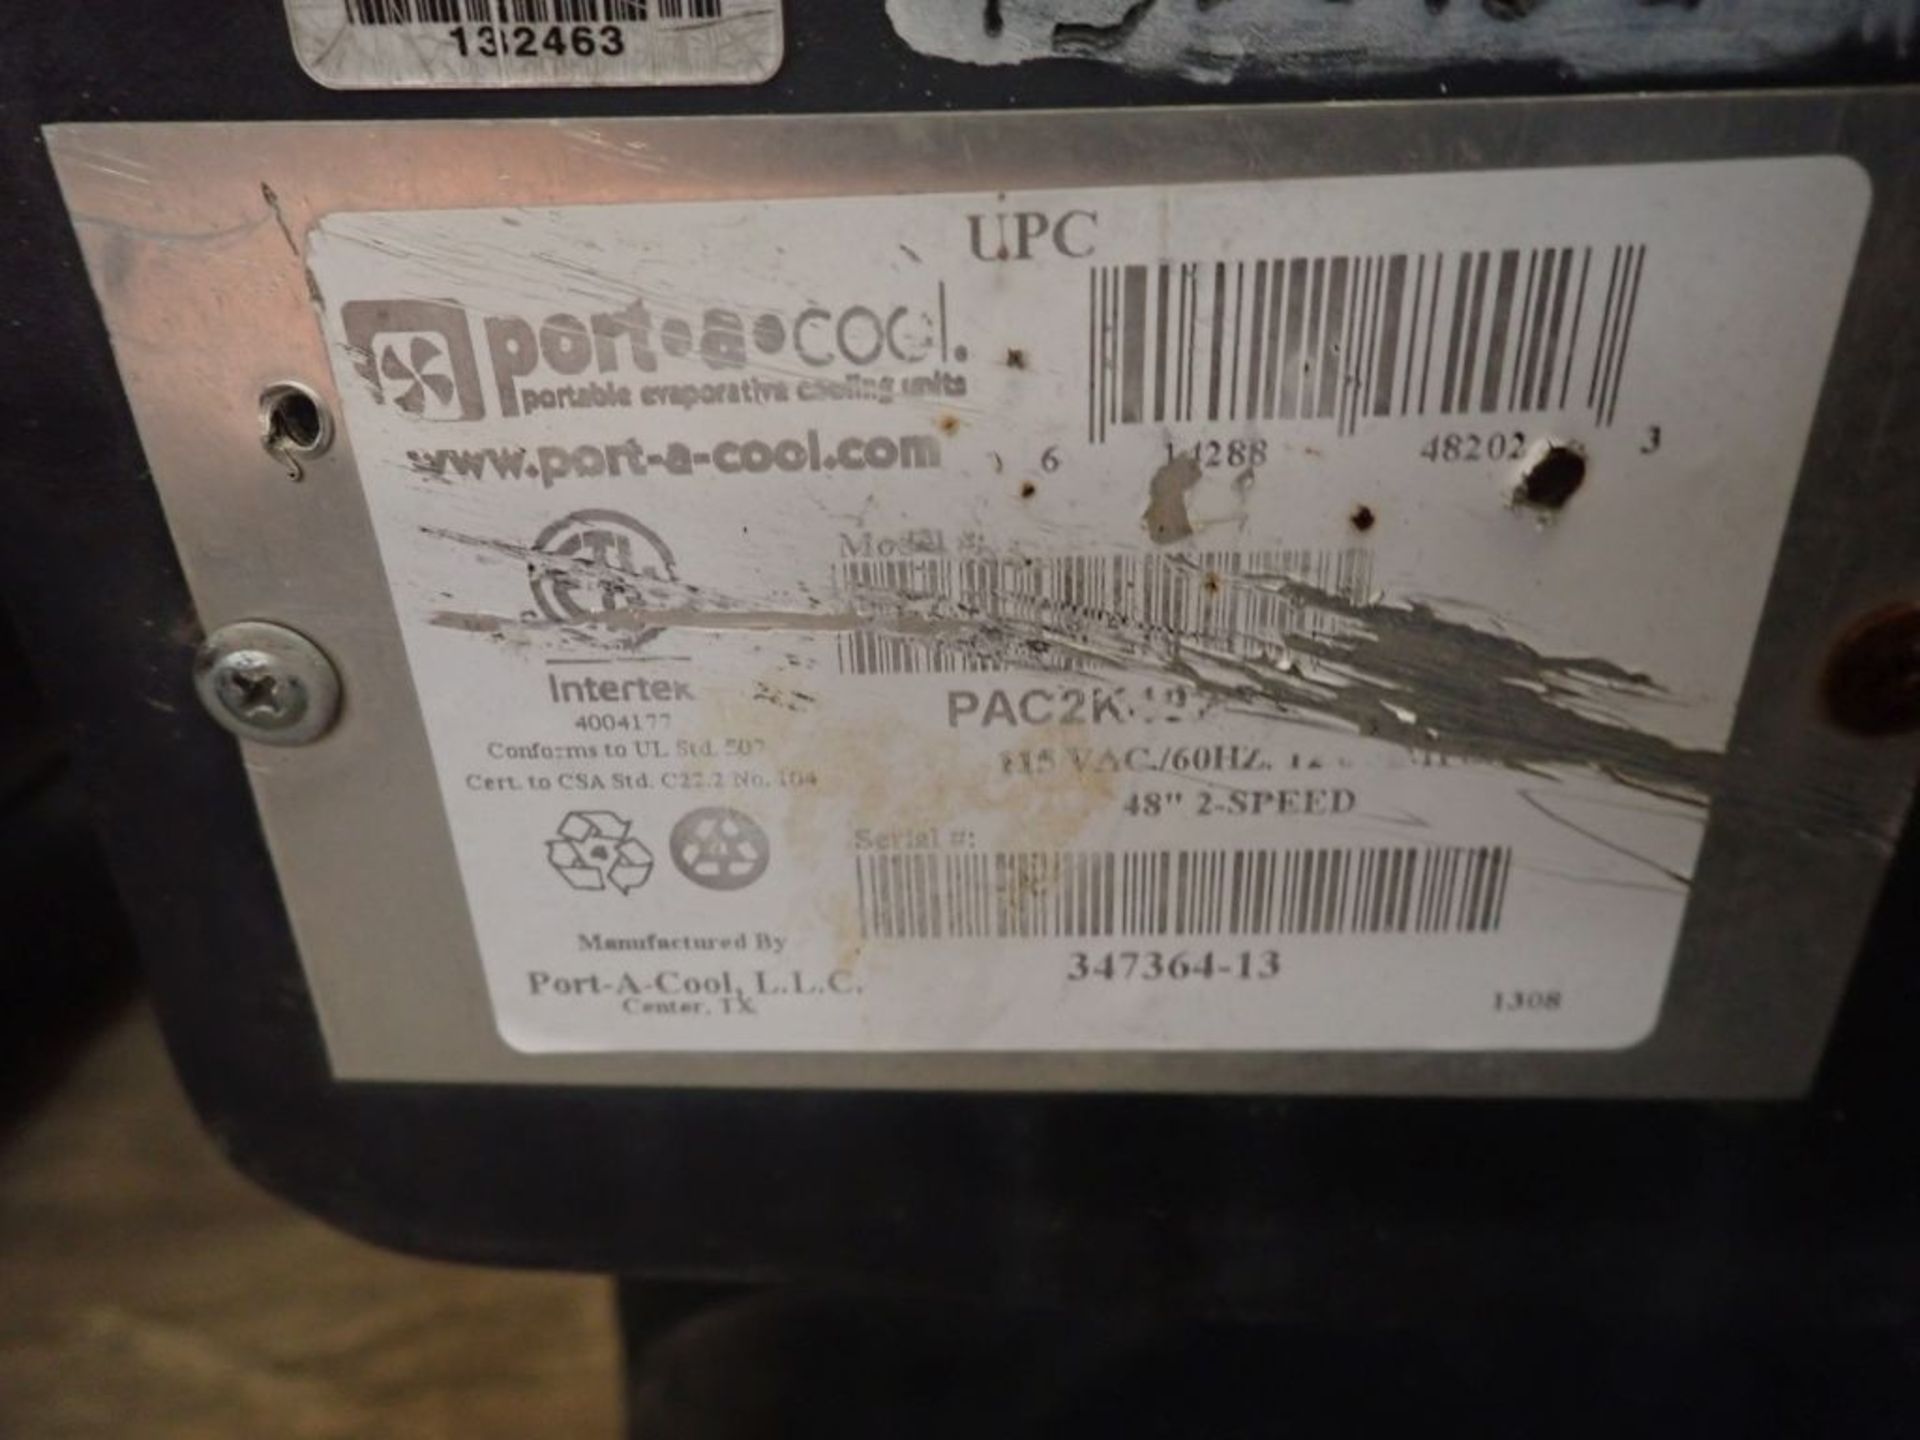 Port-A-Cool Water Cooled Shop Fan | Model No. PAC2K4825; 12A; 48" 2-Speed - Image 5 of 6